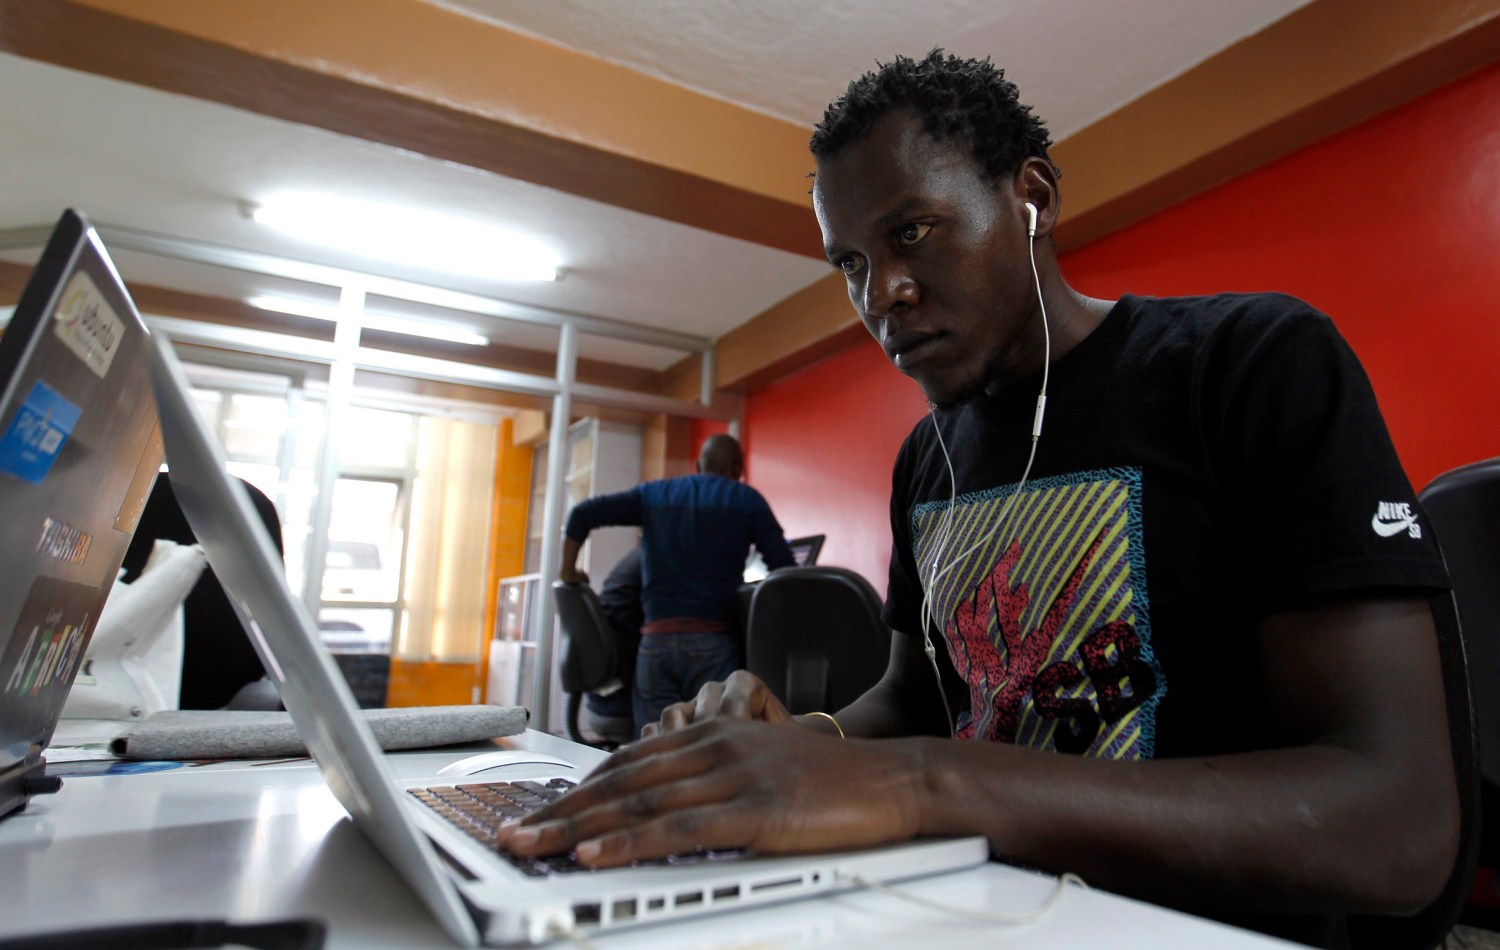 Duncan Onyango, a game design developer at Planet Rackus works on MA3Racer, a 2D mobile game inside his studio in Kenya's capital Nairobi, July 15, 2014. Industry analysts have long hailed the explosive growth of mobile telecoms in sub-Saharan Africa - 635 million subscribers by the end of 2014 climbing to 930 million by the end of 2019 according to a report by Ericsson. But size isn't everything. It is the quality of those mobile phone connections, subscriptions and surrounding infrastructure that is holding up Africa's nascent games development industry, not the quantity of handsets. The number of expensive smartphones that can run sophisticated games and applications is low, accounting for only 14 percent of African mobile connections by the end of 2014, says research group Ovum. Planet Rackus's first edition of MA3Racer, a 2D mobile game, had more than a million downloads on Nokia's Ovi platform, reflecting strong demand.  REUTERS/Thomas Mukoya (KENYA - Tags: SOCIETY SCIENCE TECHNOLOGY BUSINESS TELECOMS) - GM1EA7F1HRG01